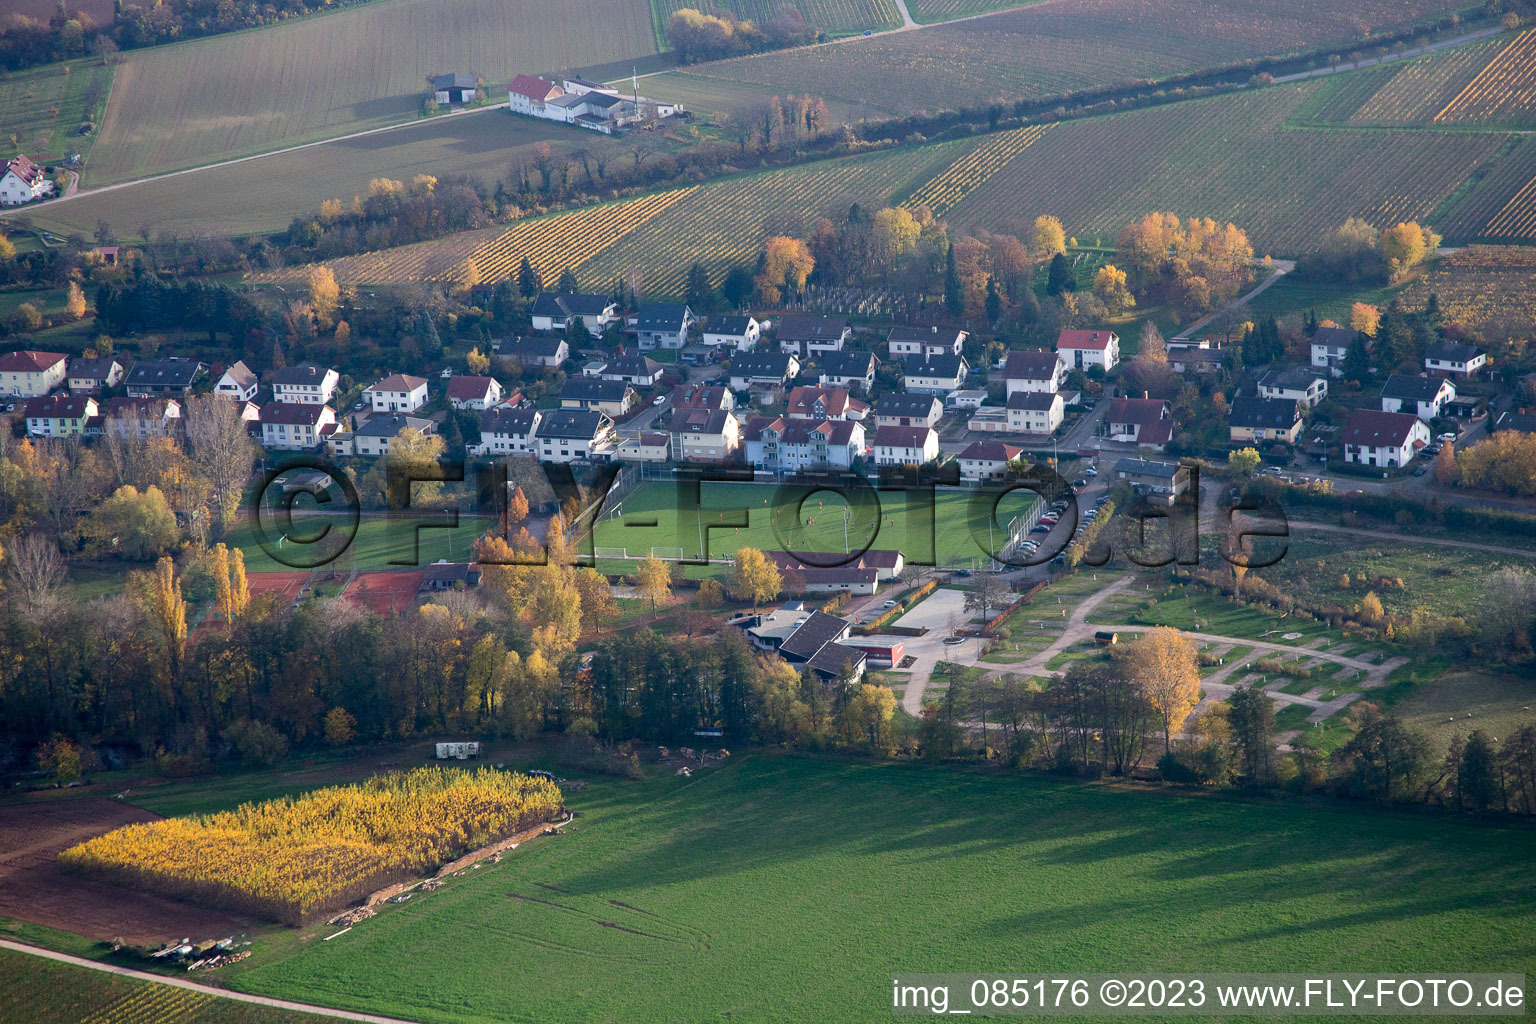 Aerial photograpy of Sports fields in the district Ingenheim in Billigheim-Ingenheim in the state Rhineland-Palatinate, Germany